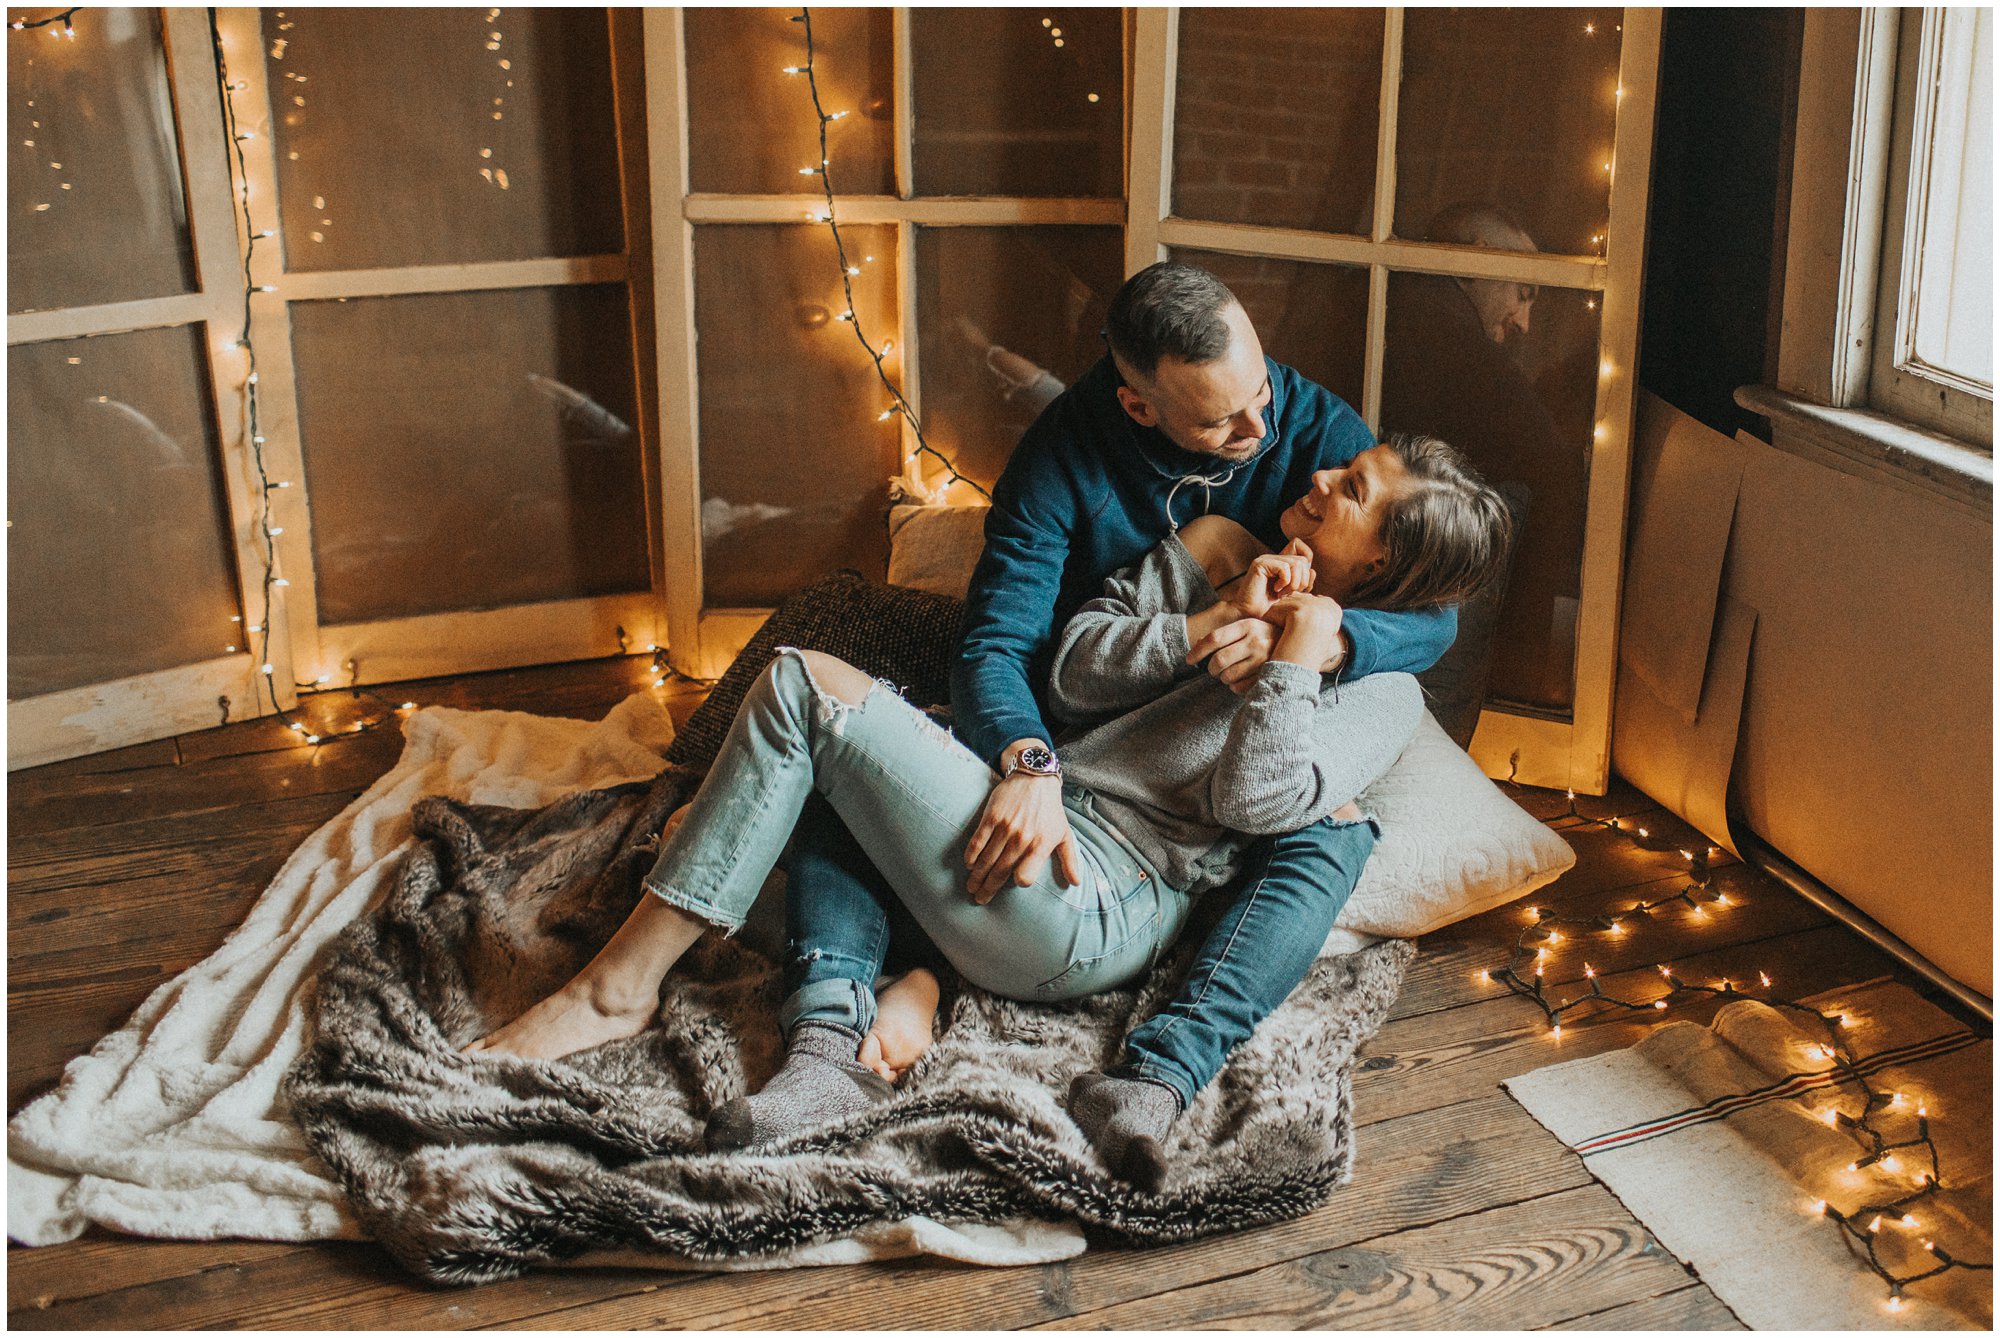 fun intimate engagement photography at home with string lights